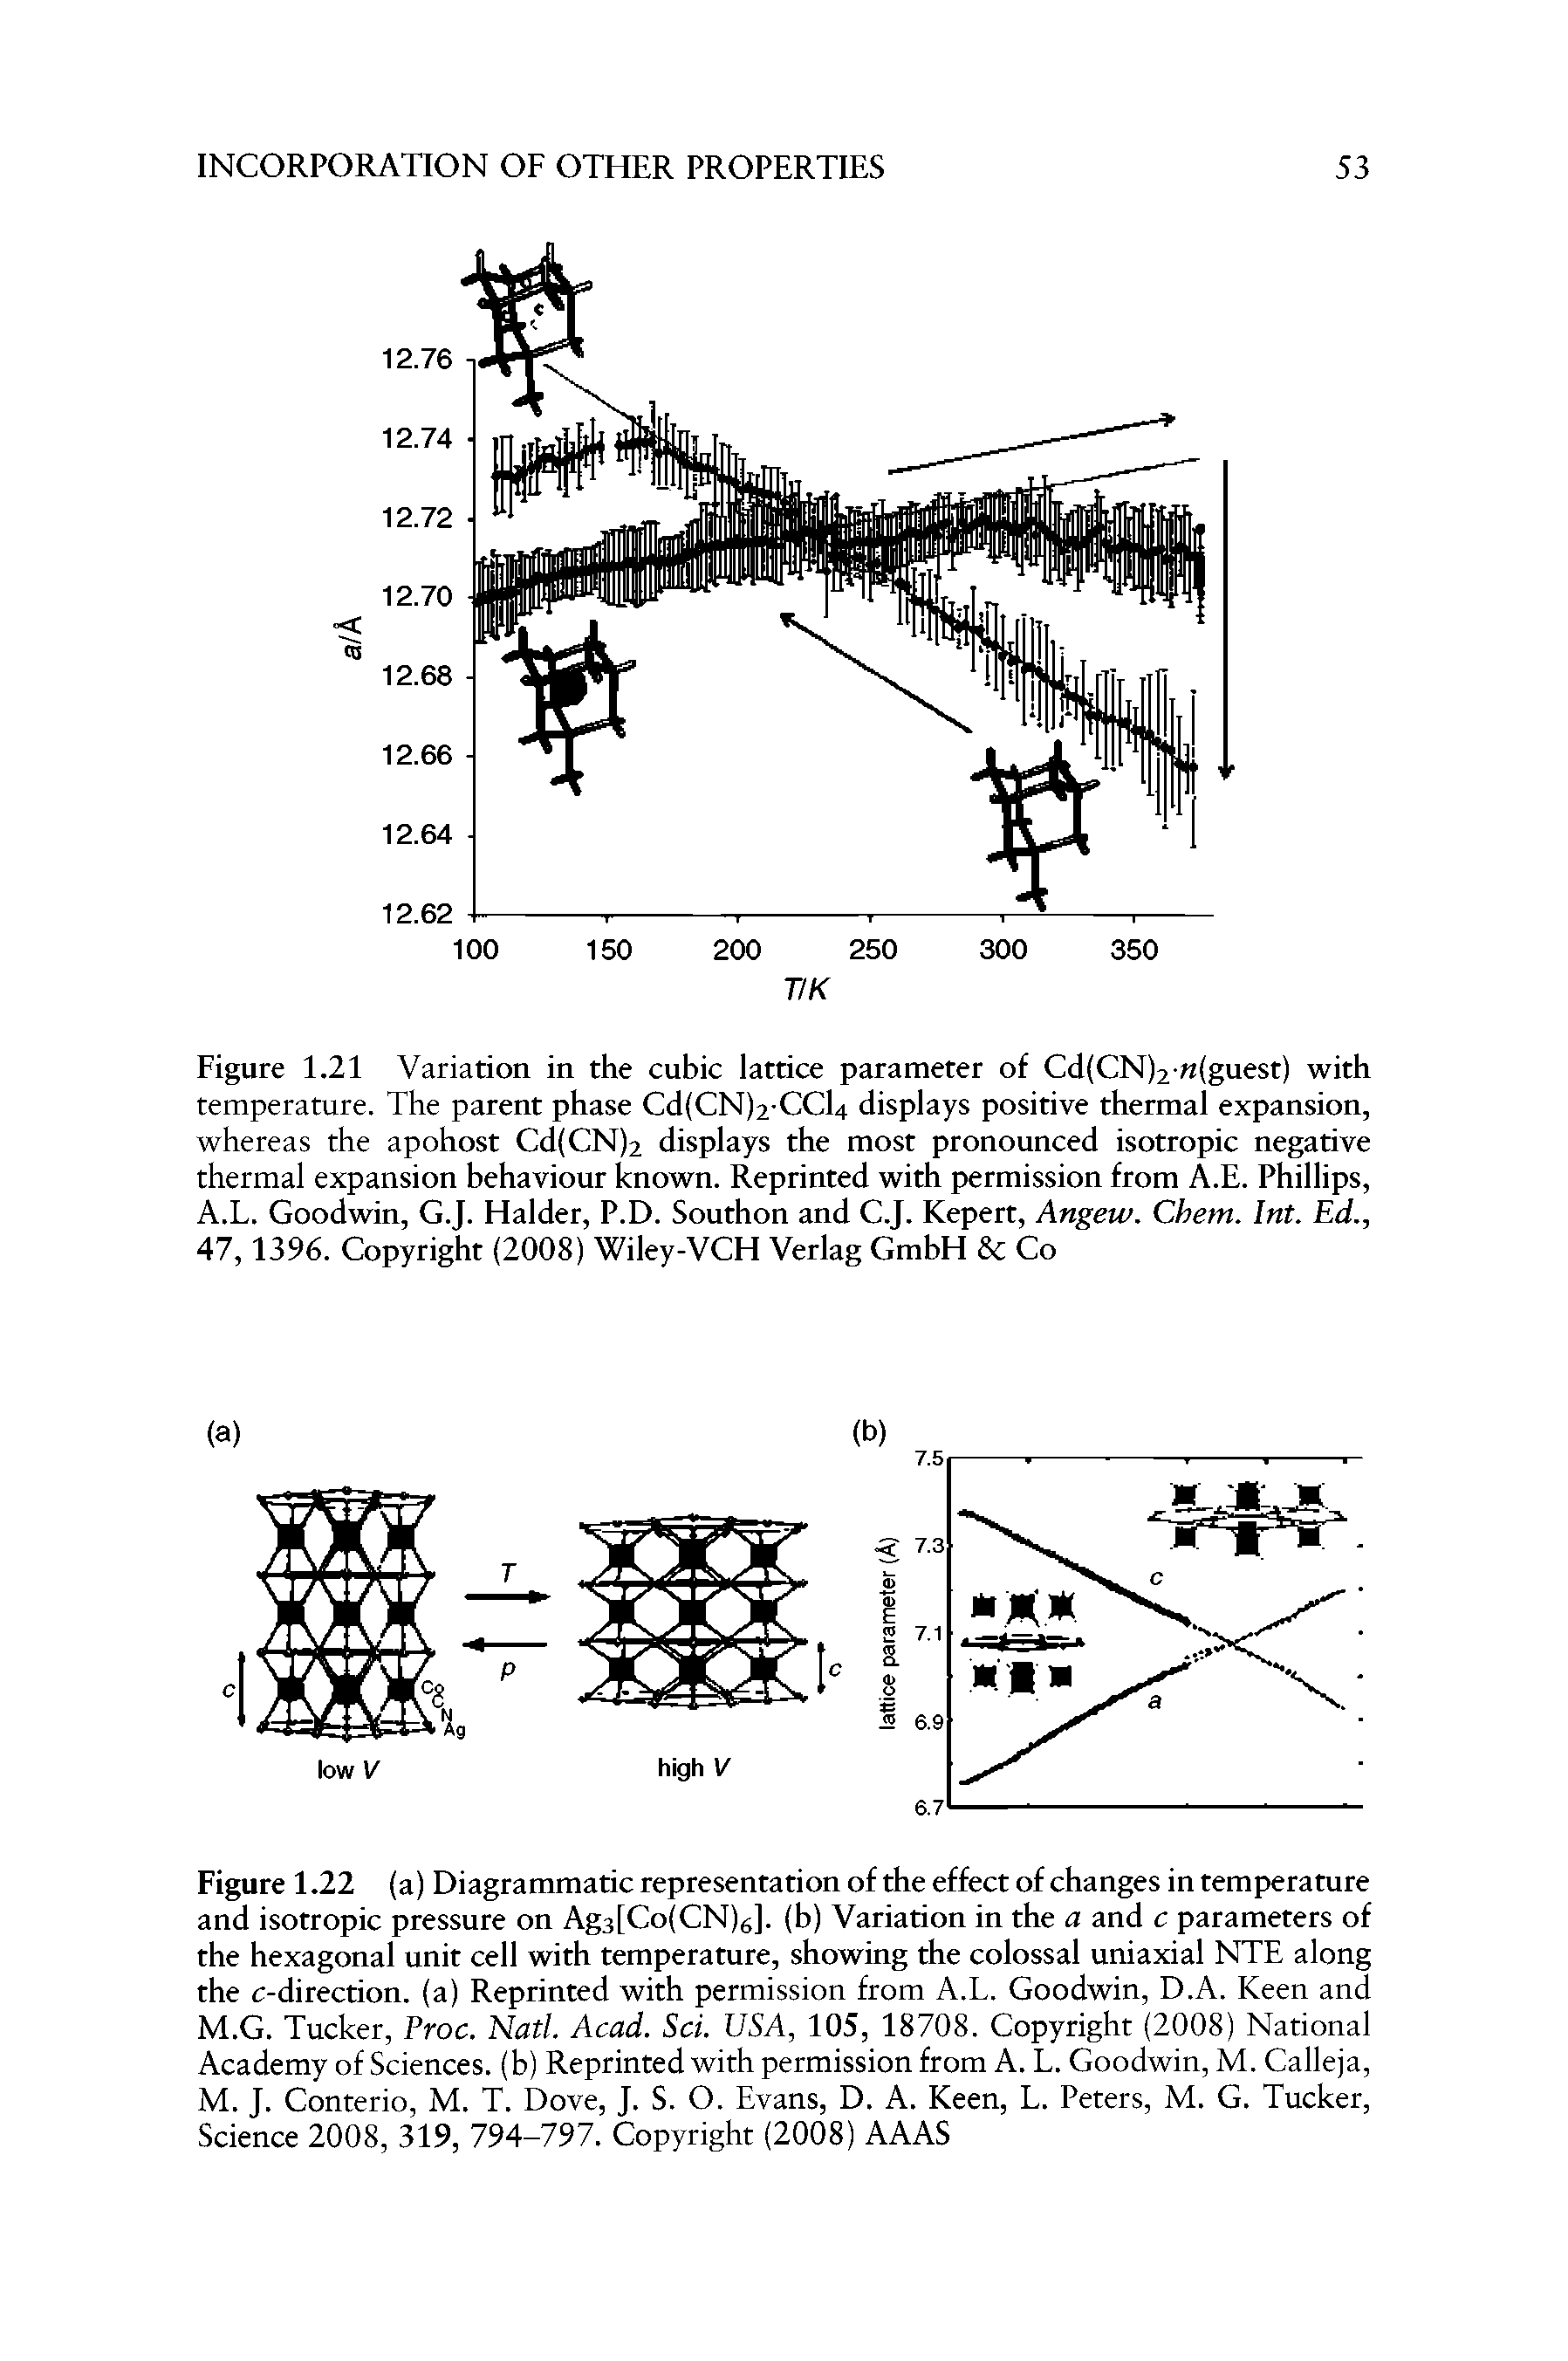 Figure 1.21 Variation in the cubic lattice parameter of Cd(CN)2 guest) with temperature. The parent phase Cd(CN)2-CCl4 displays positive thermal expansion, whereas the apohost CdfCNji displays the most pronounced isotropic negative thermal expansion behaviour known. Reprinted with permission from A.E. Phillips, A.L. Goodwin, G.J. Haider, P.D. Southon and C.J. Kepert, Angew. Chem. Int. Ed., 47,1396. Copyright (2008) Wiley-VCH Verlag GmbH c Co...